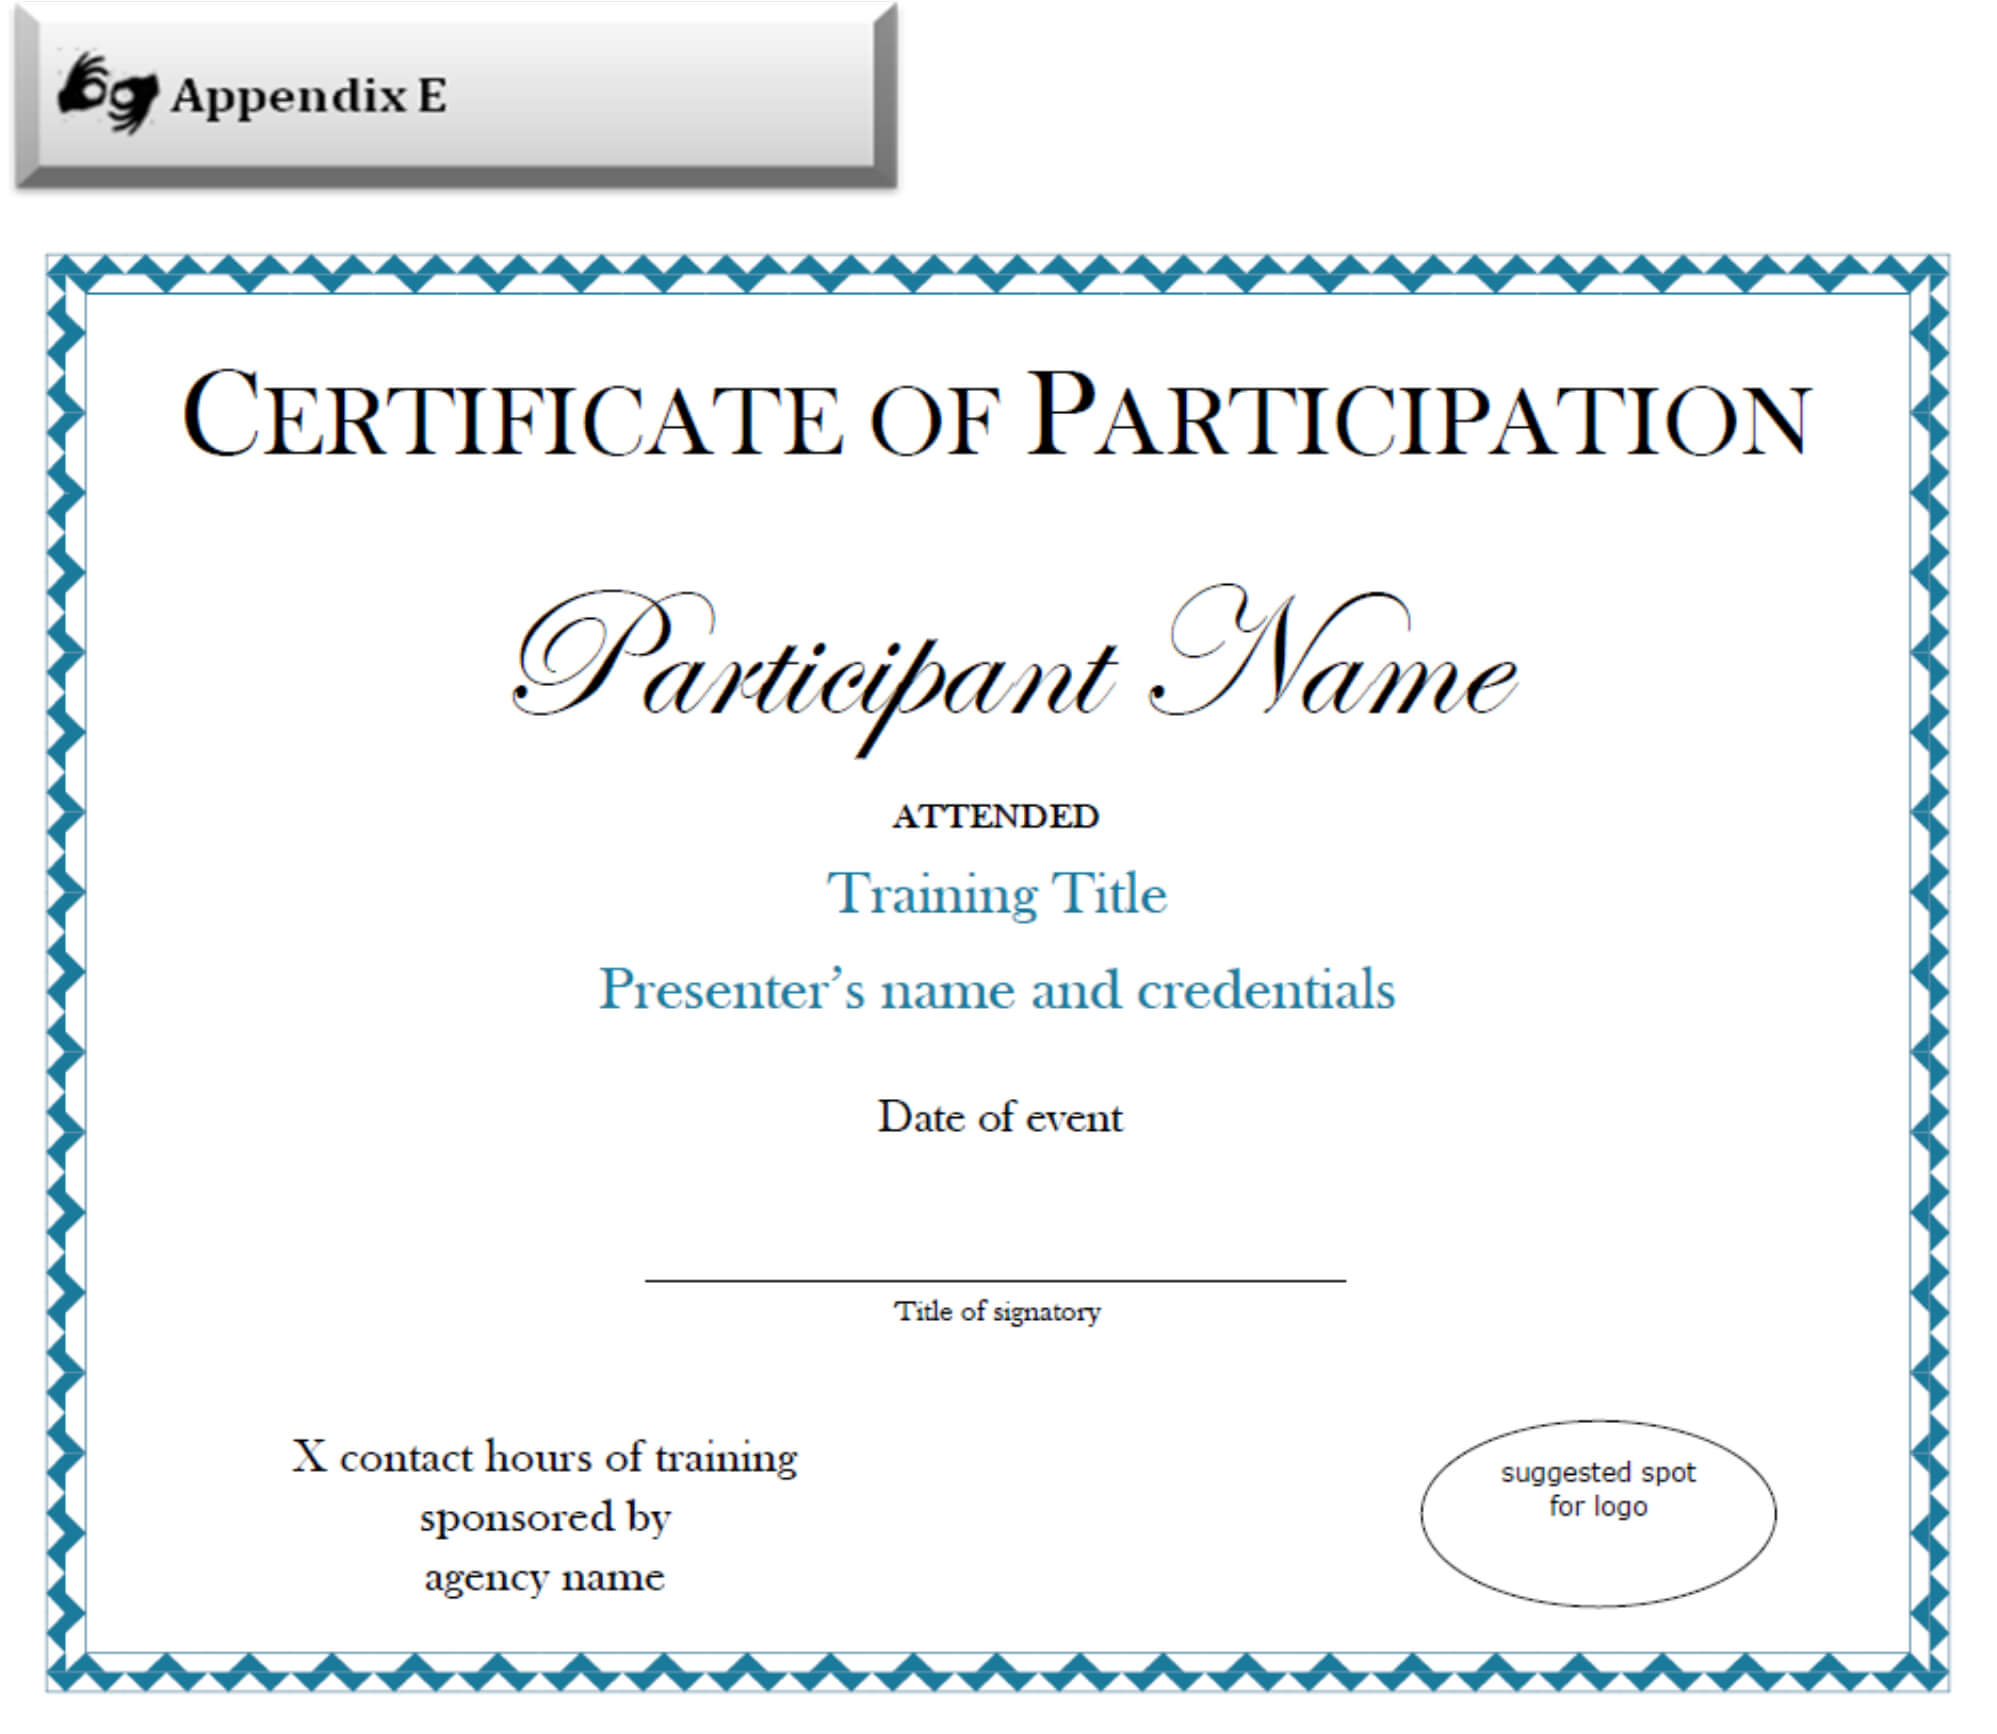 Certificate Of Participation Sample Free Download With Certificate Of Participation In Workshop Template